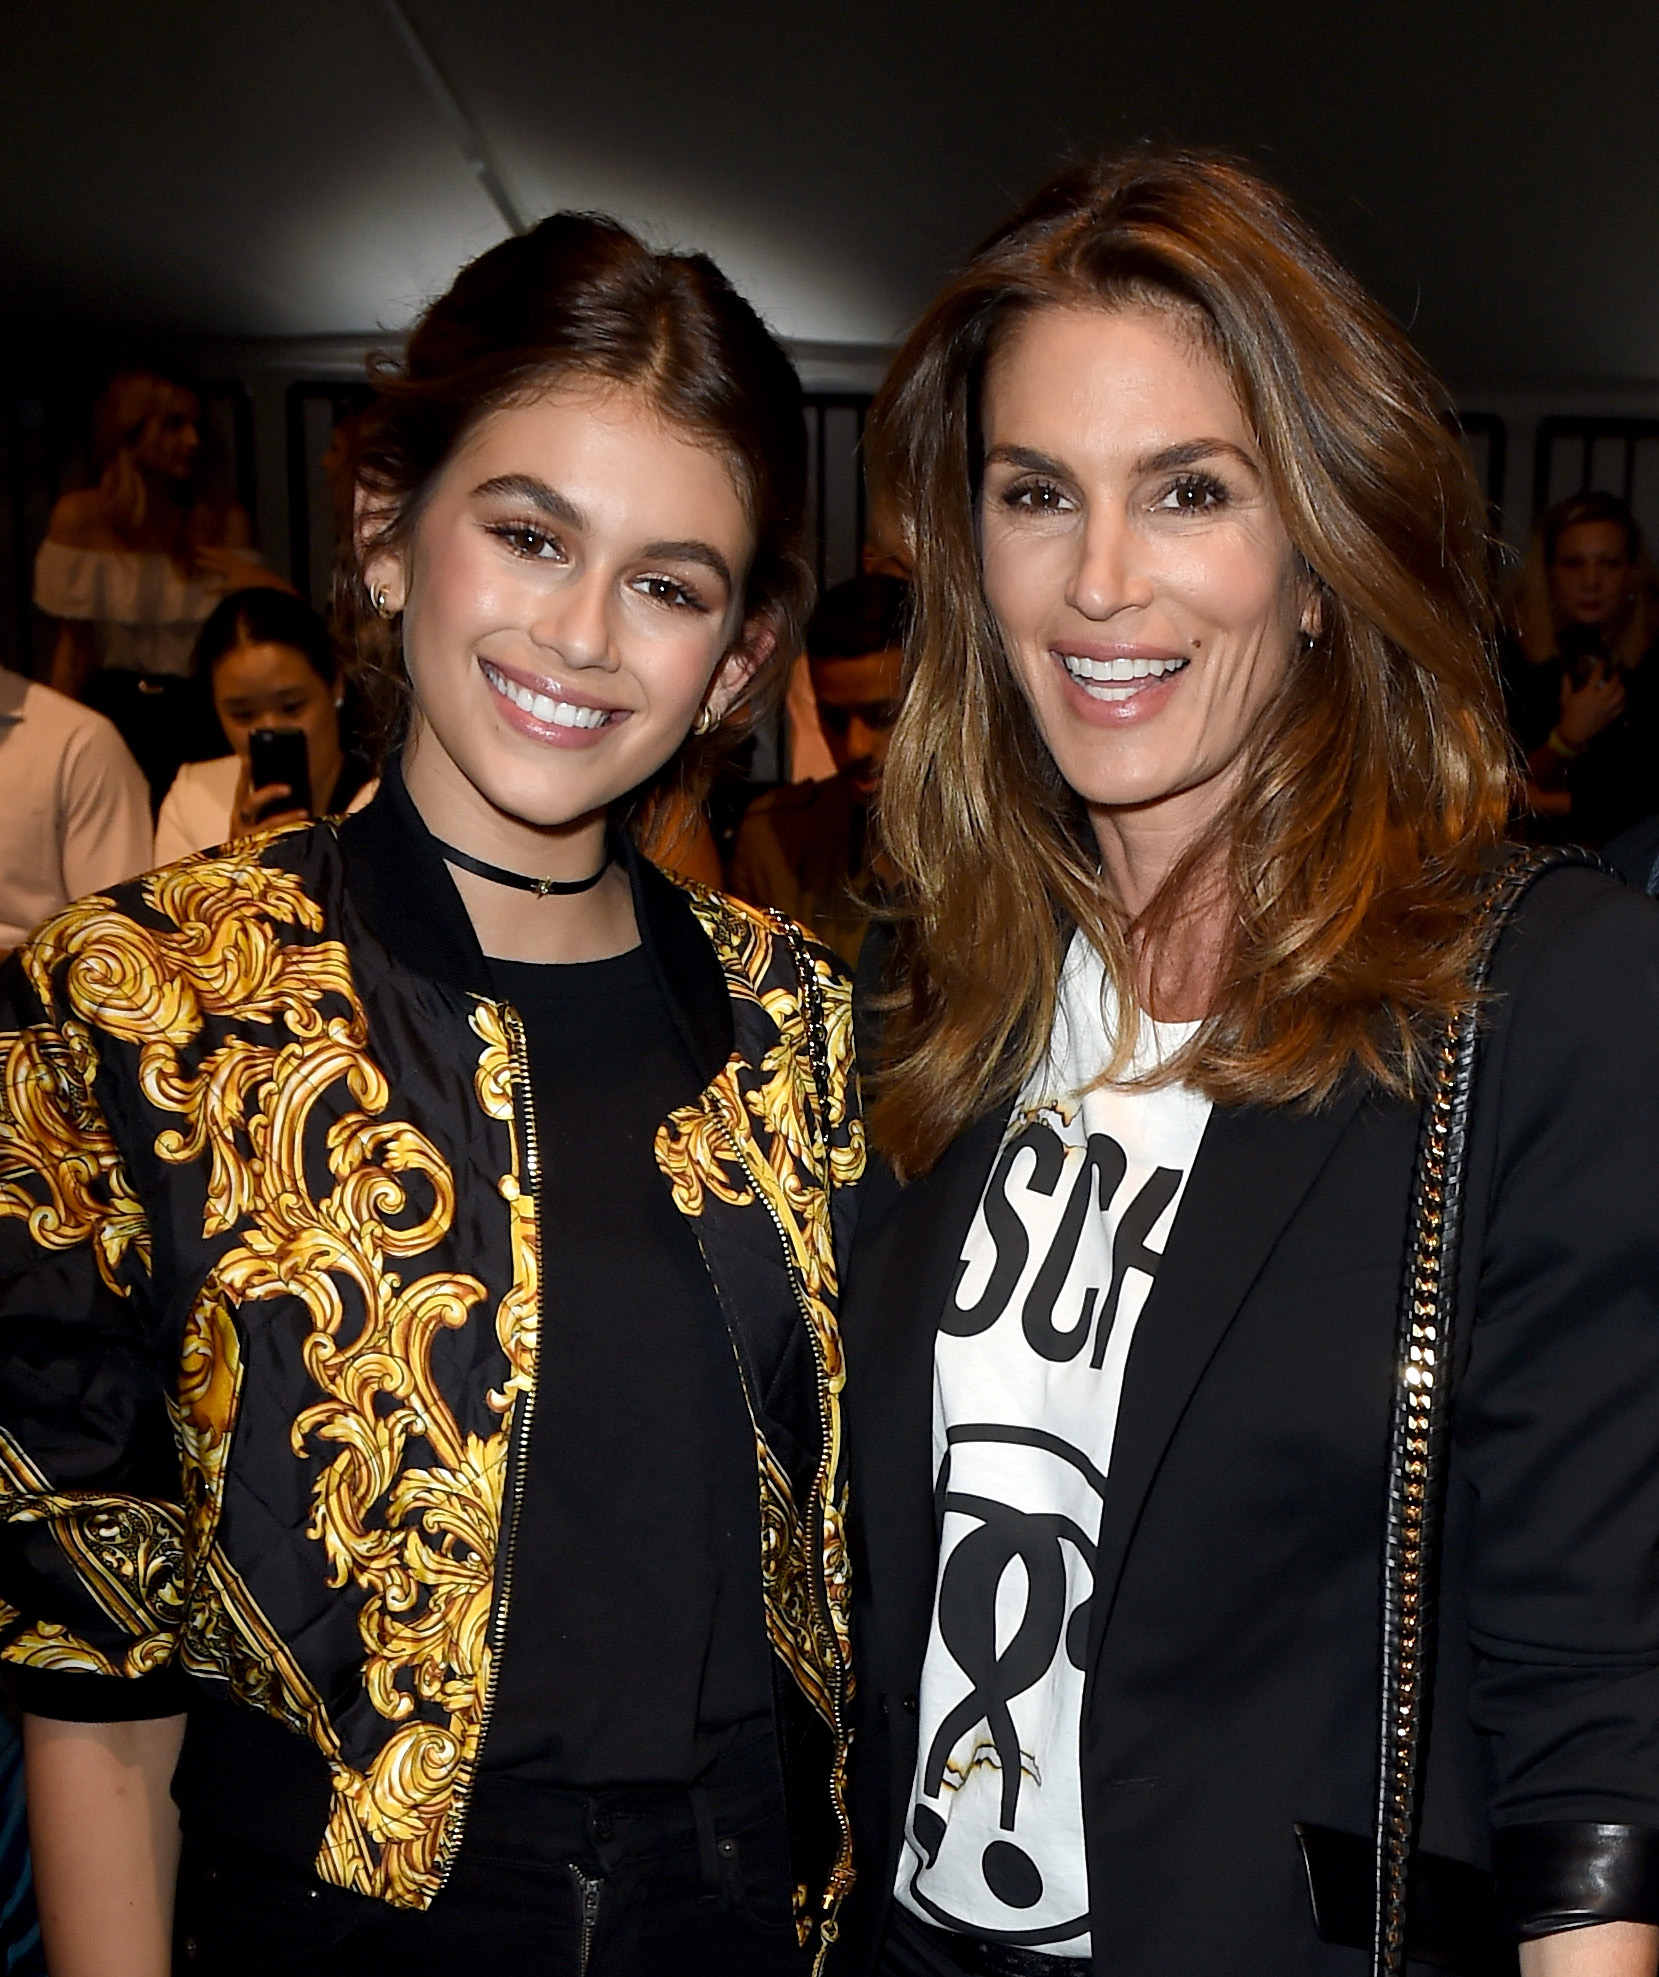 Kaia Gerber Designed a Bag for Marc Jacobs, Plus More Celebrity Style  Collaborations